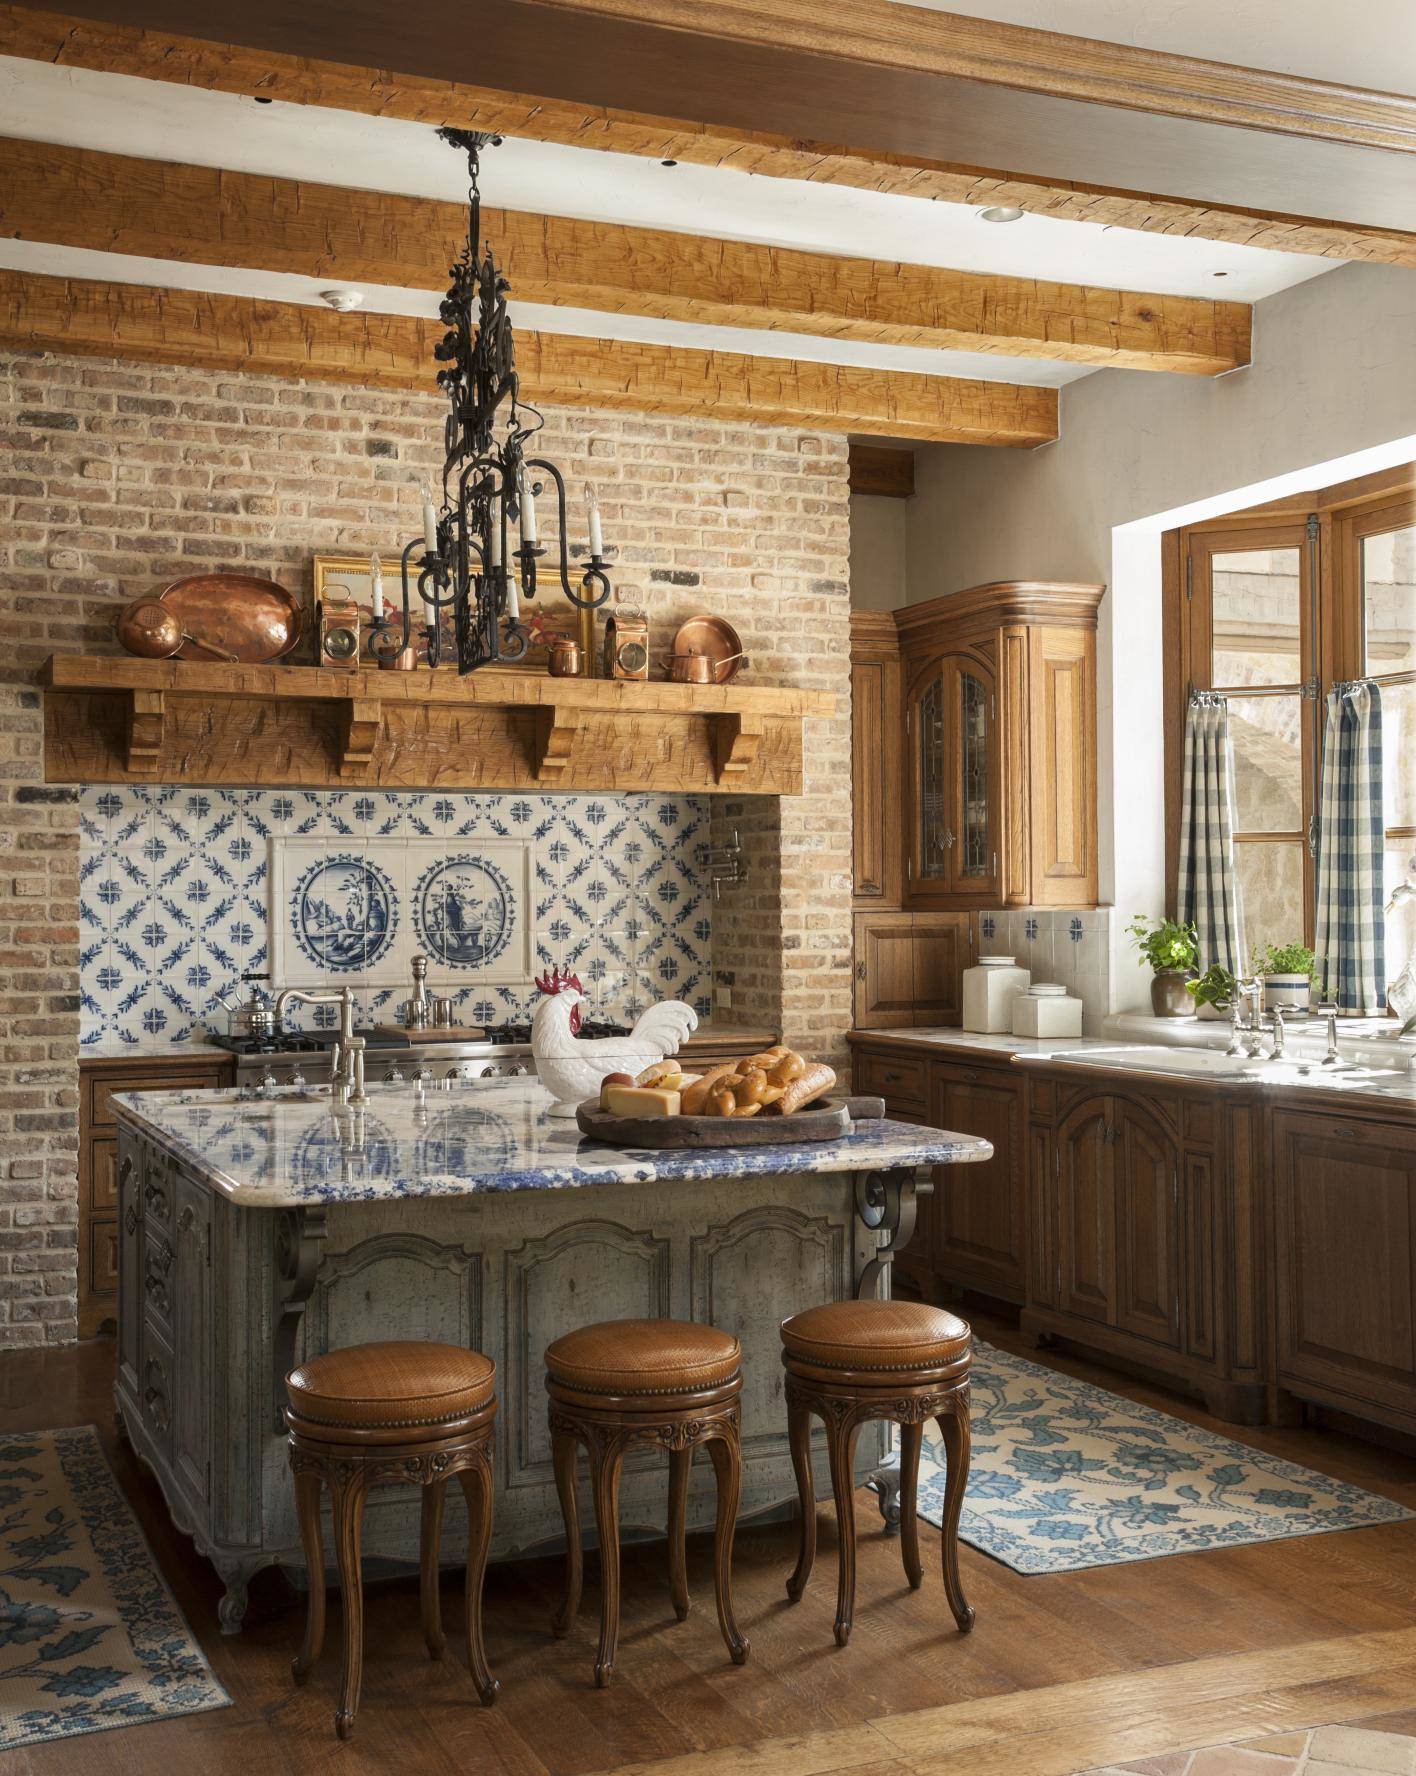 french country kitchen pictures fantastic cabinets modern design ideas flooring style